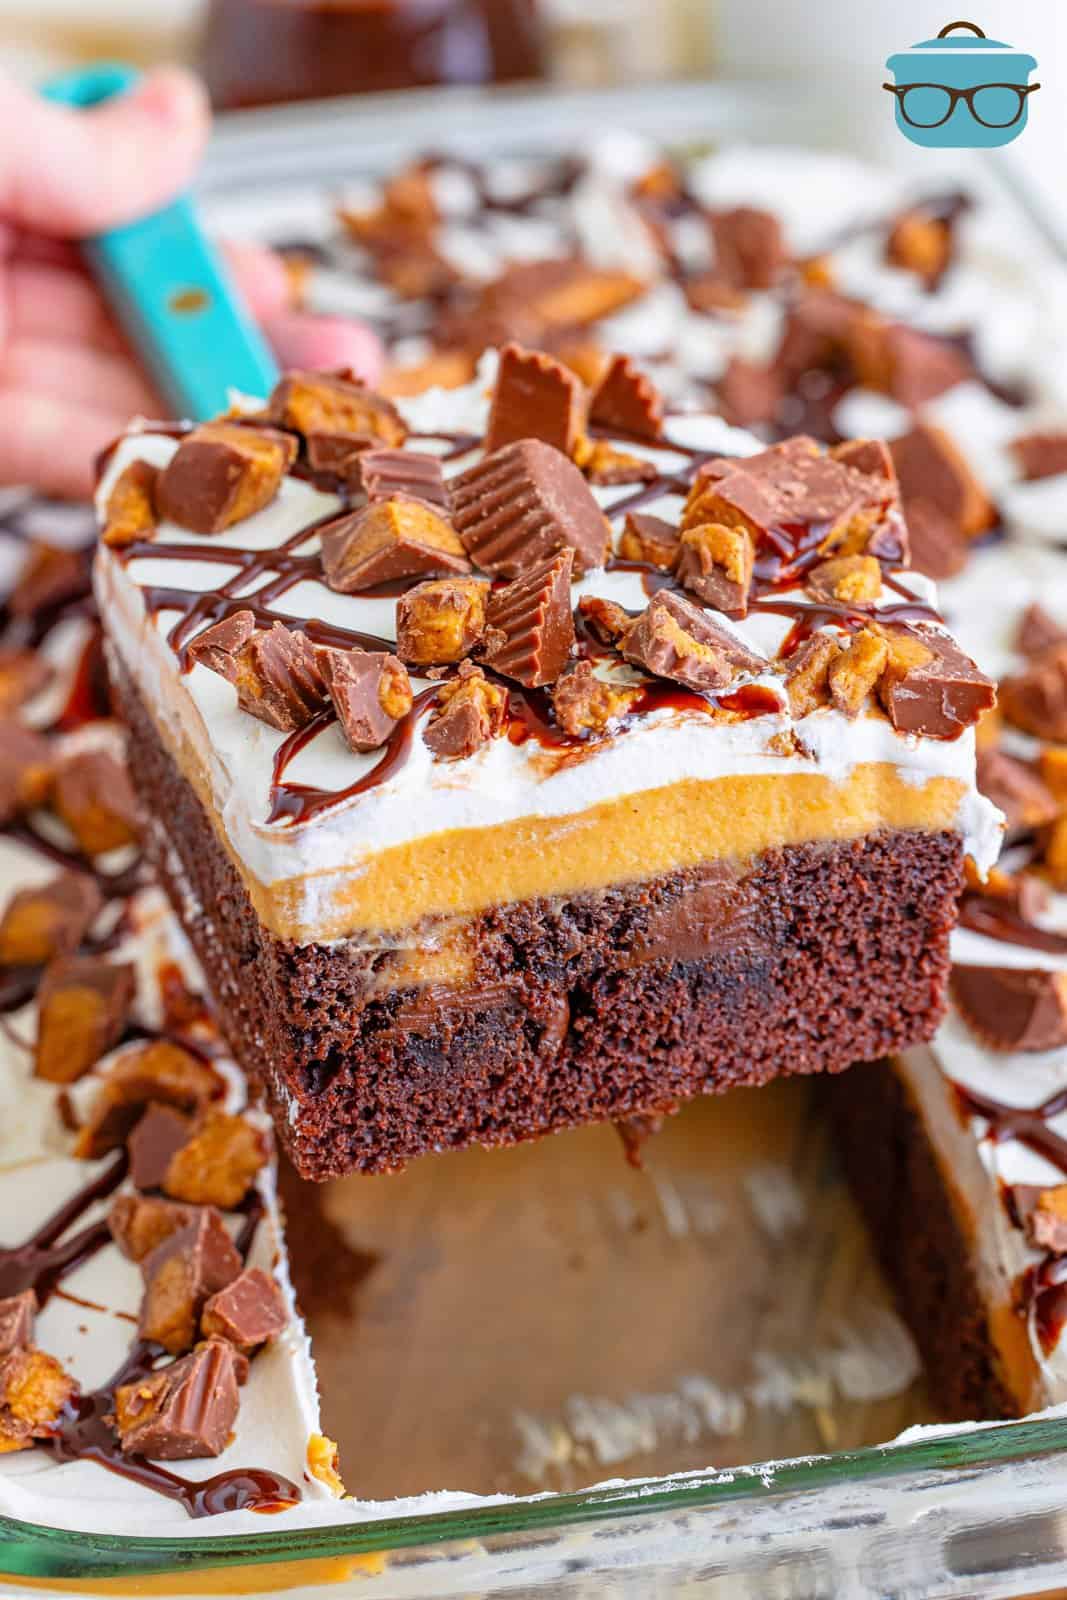 A serving utensil holding a large slice of Reese's Peanut Butter Poke Cake.